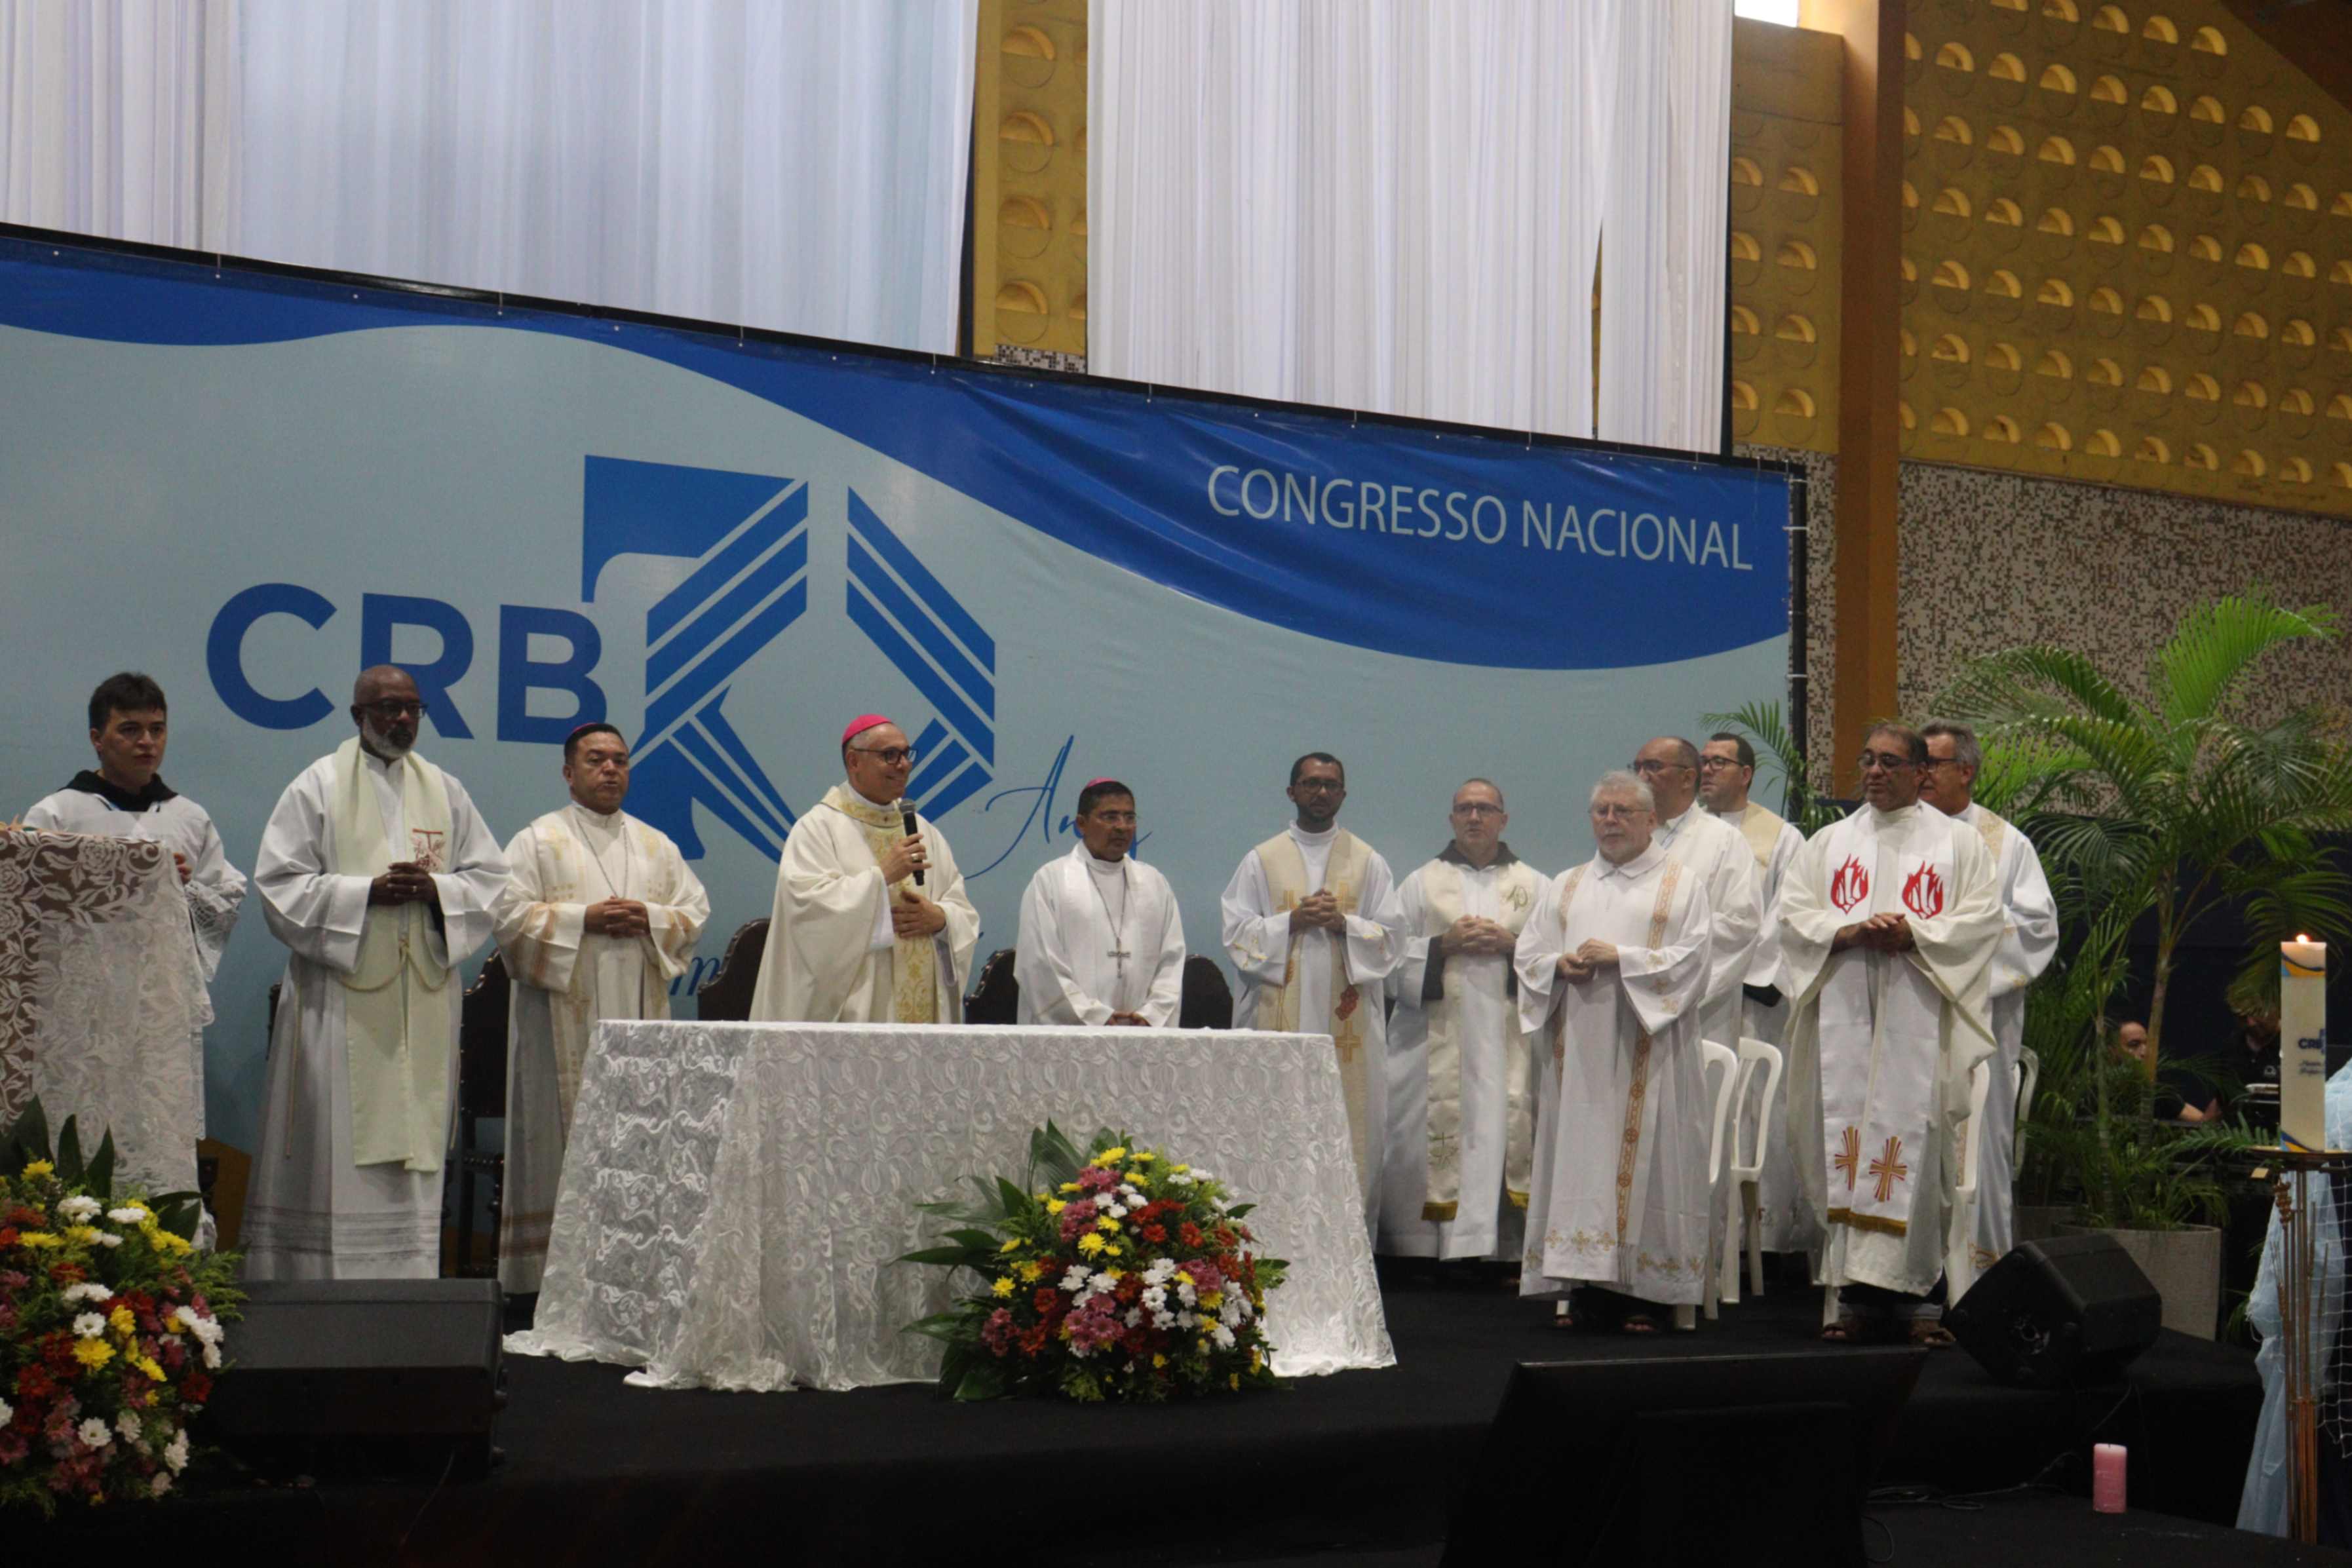 The four-day congress began with a eucharistic celebration, presided over by Bishop Gregório Paixão, the archbishop of Fortaleza